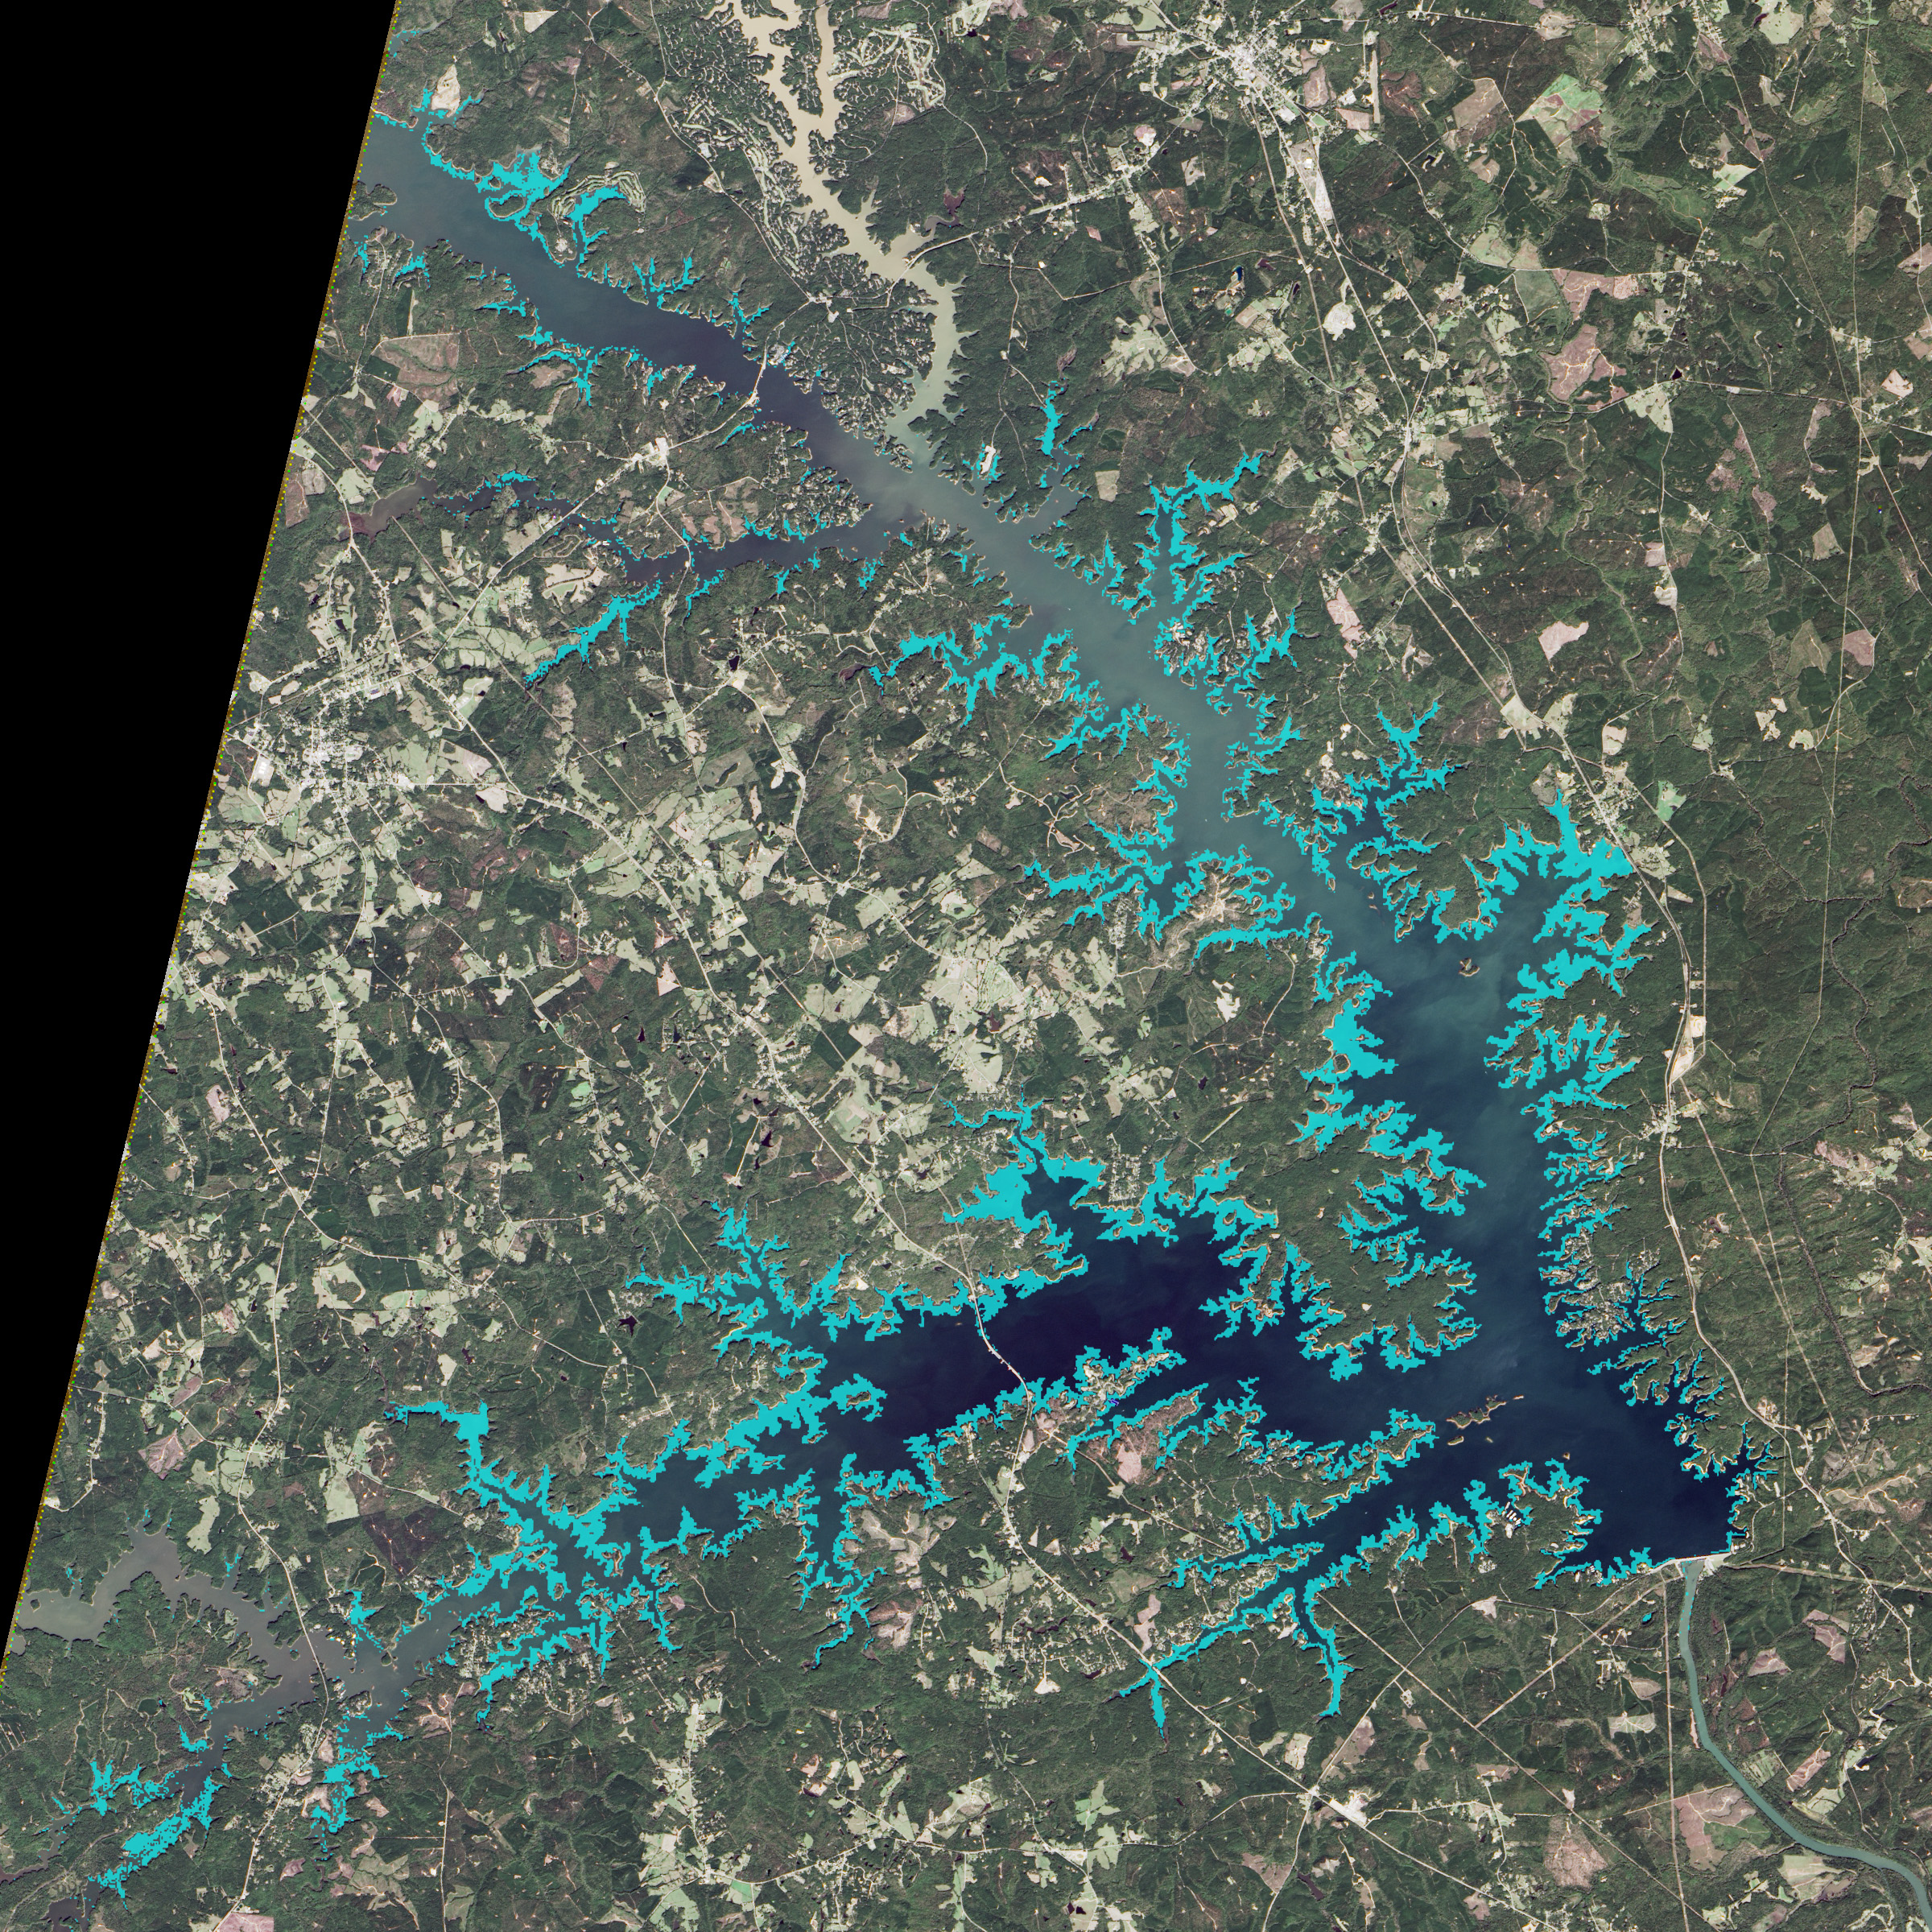 satellite image showing the edges of a water reservoir 